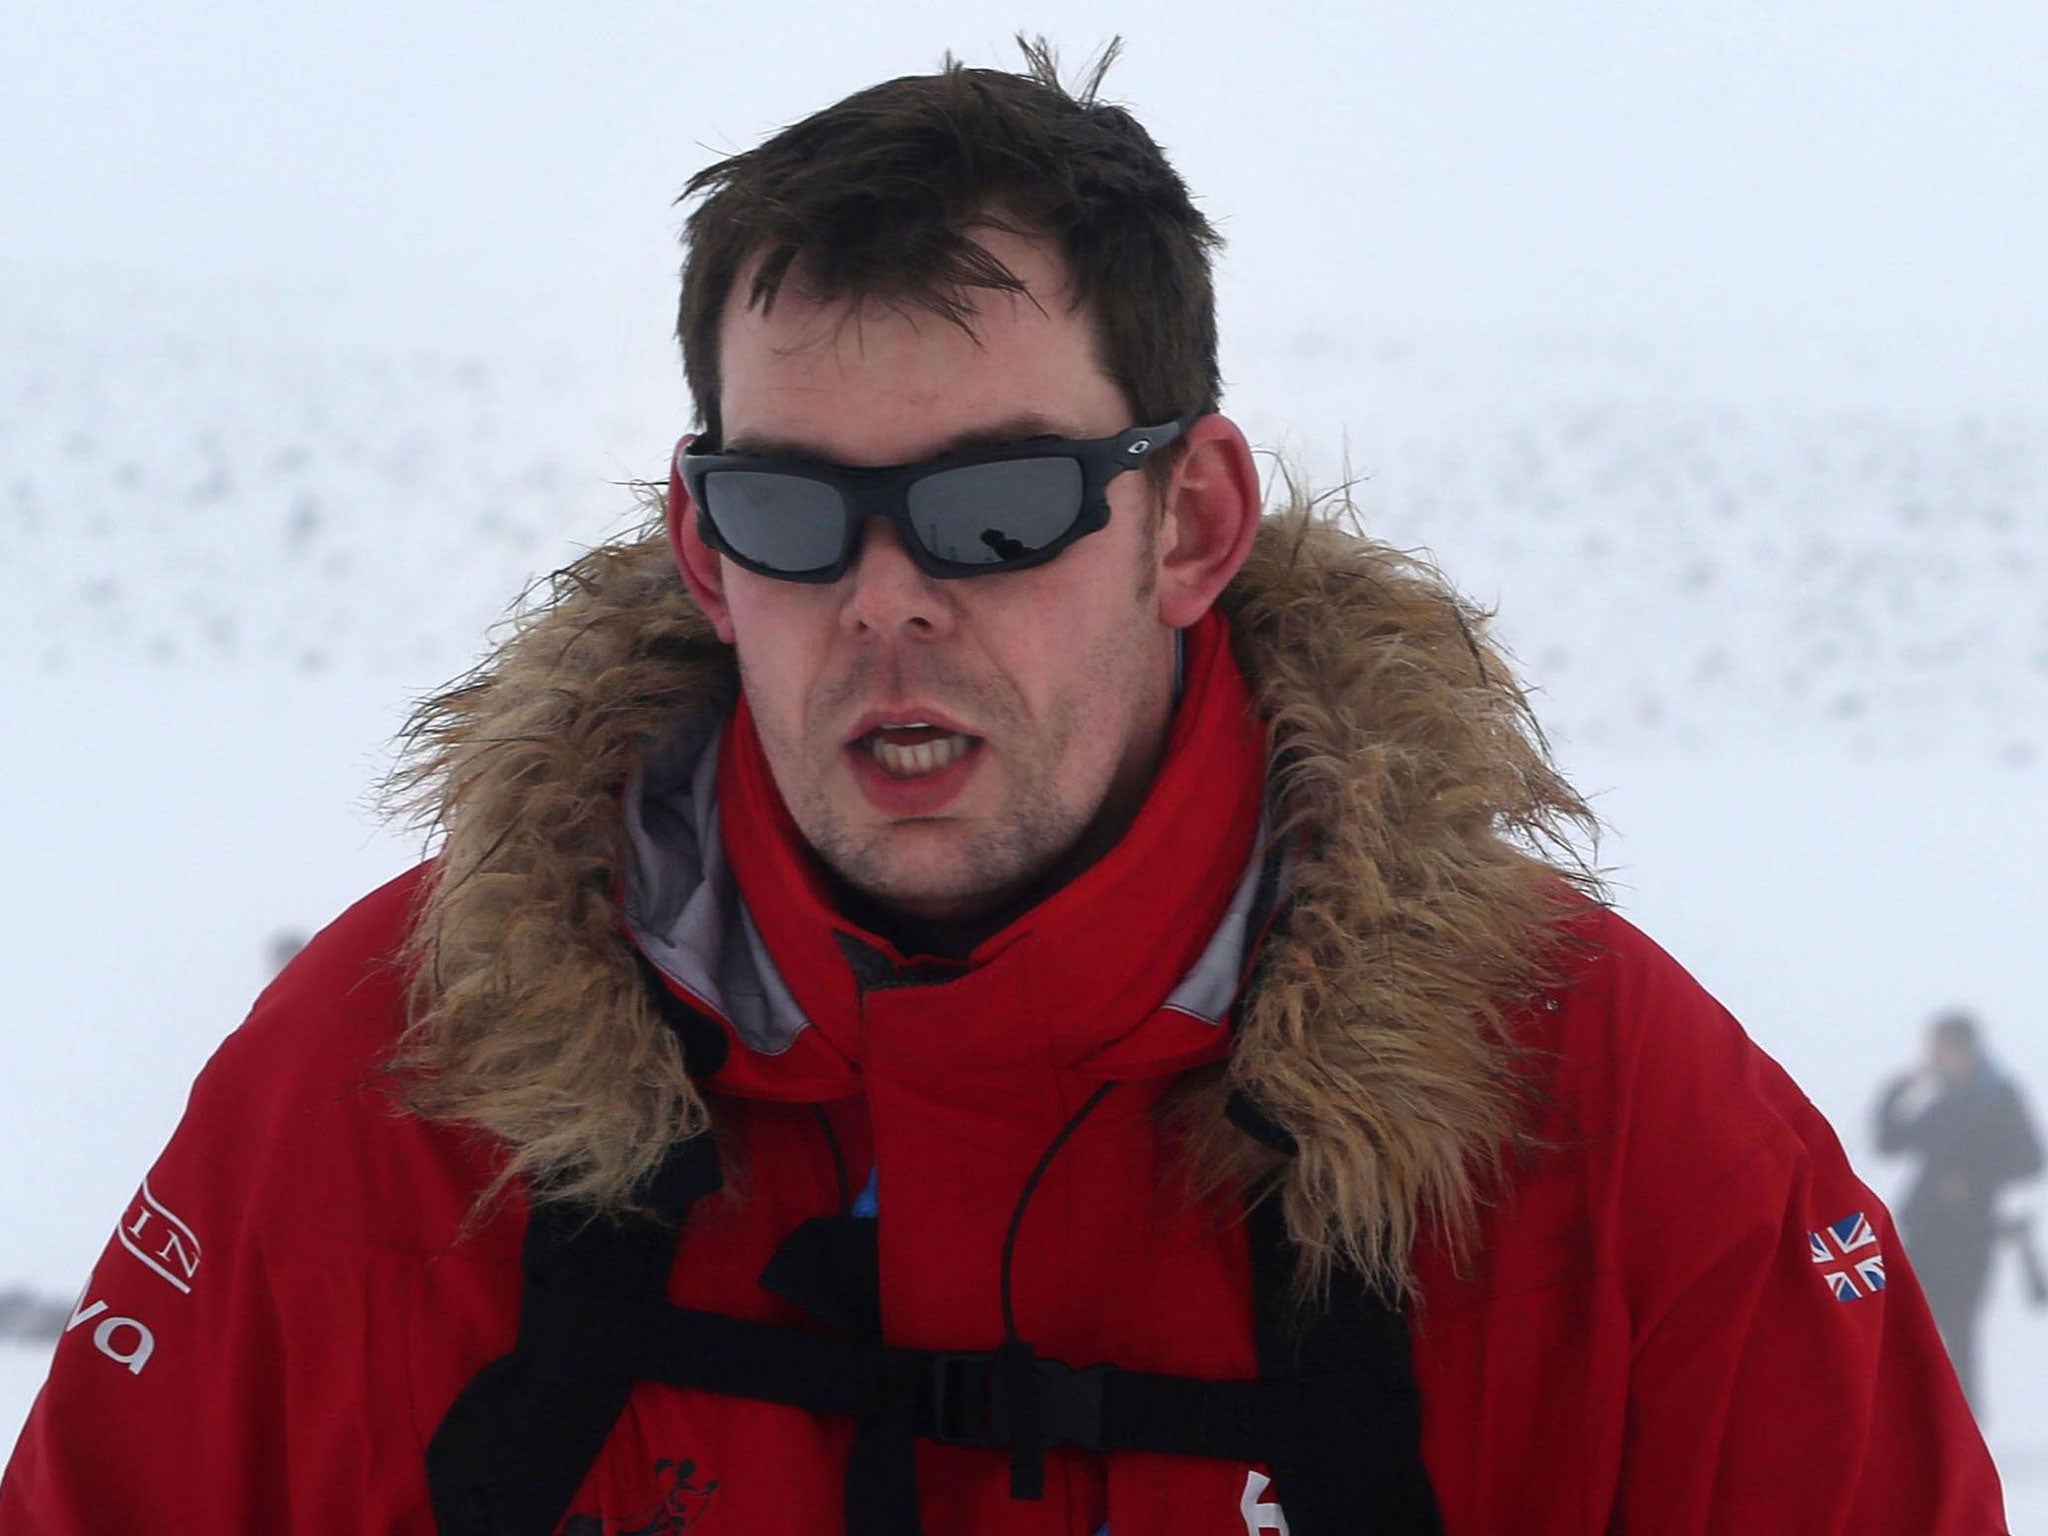 Duncan Slater travelled with Prince Harry to the South Pole